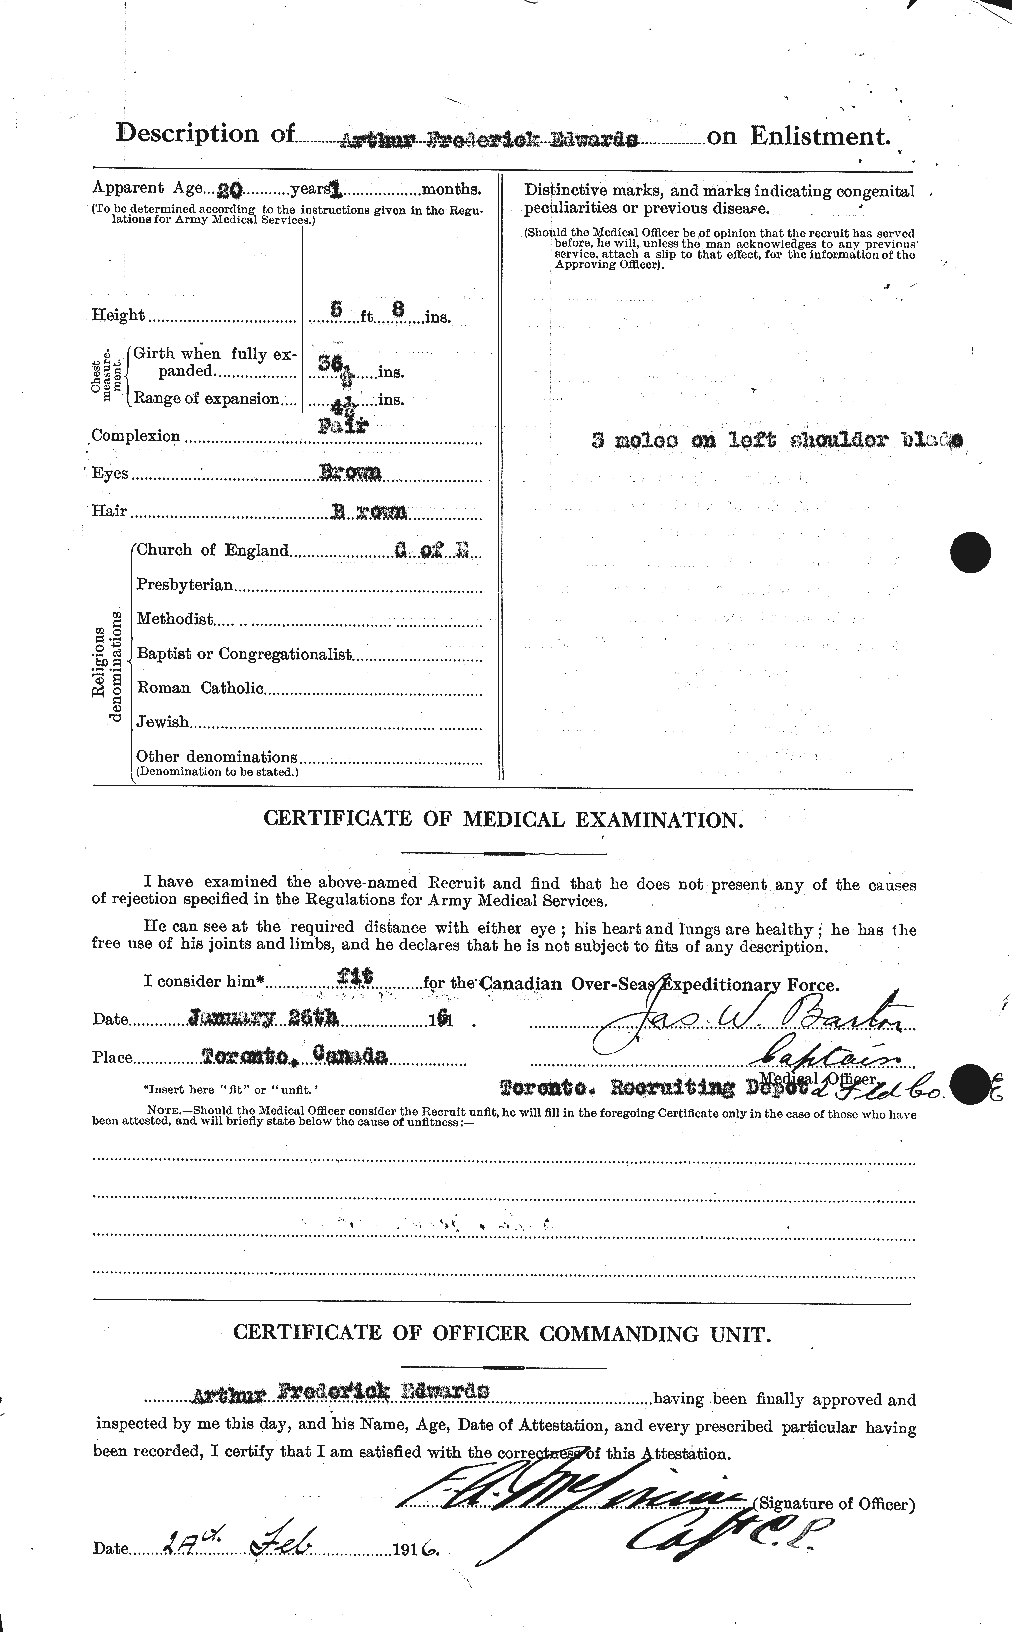 Personnel Records of the First World War - CEF 313139b